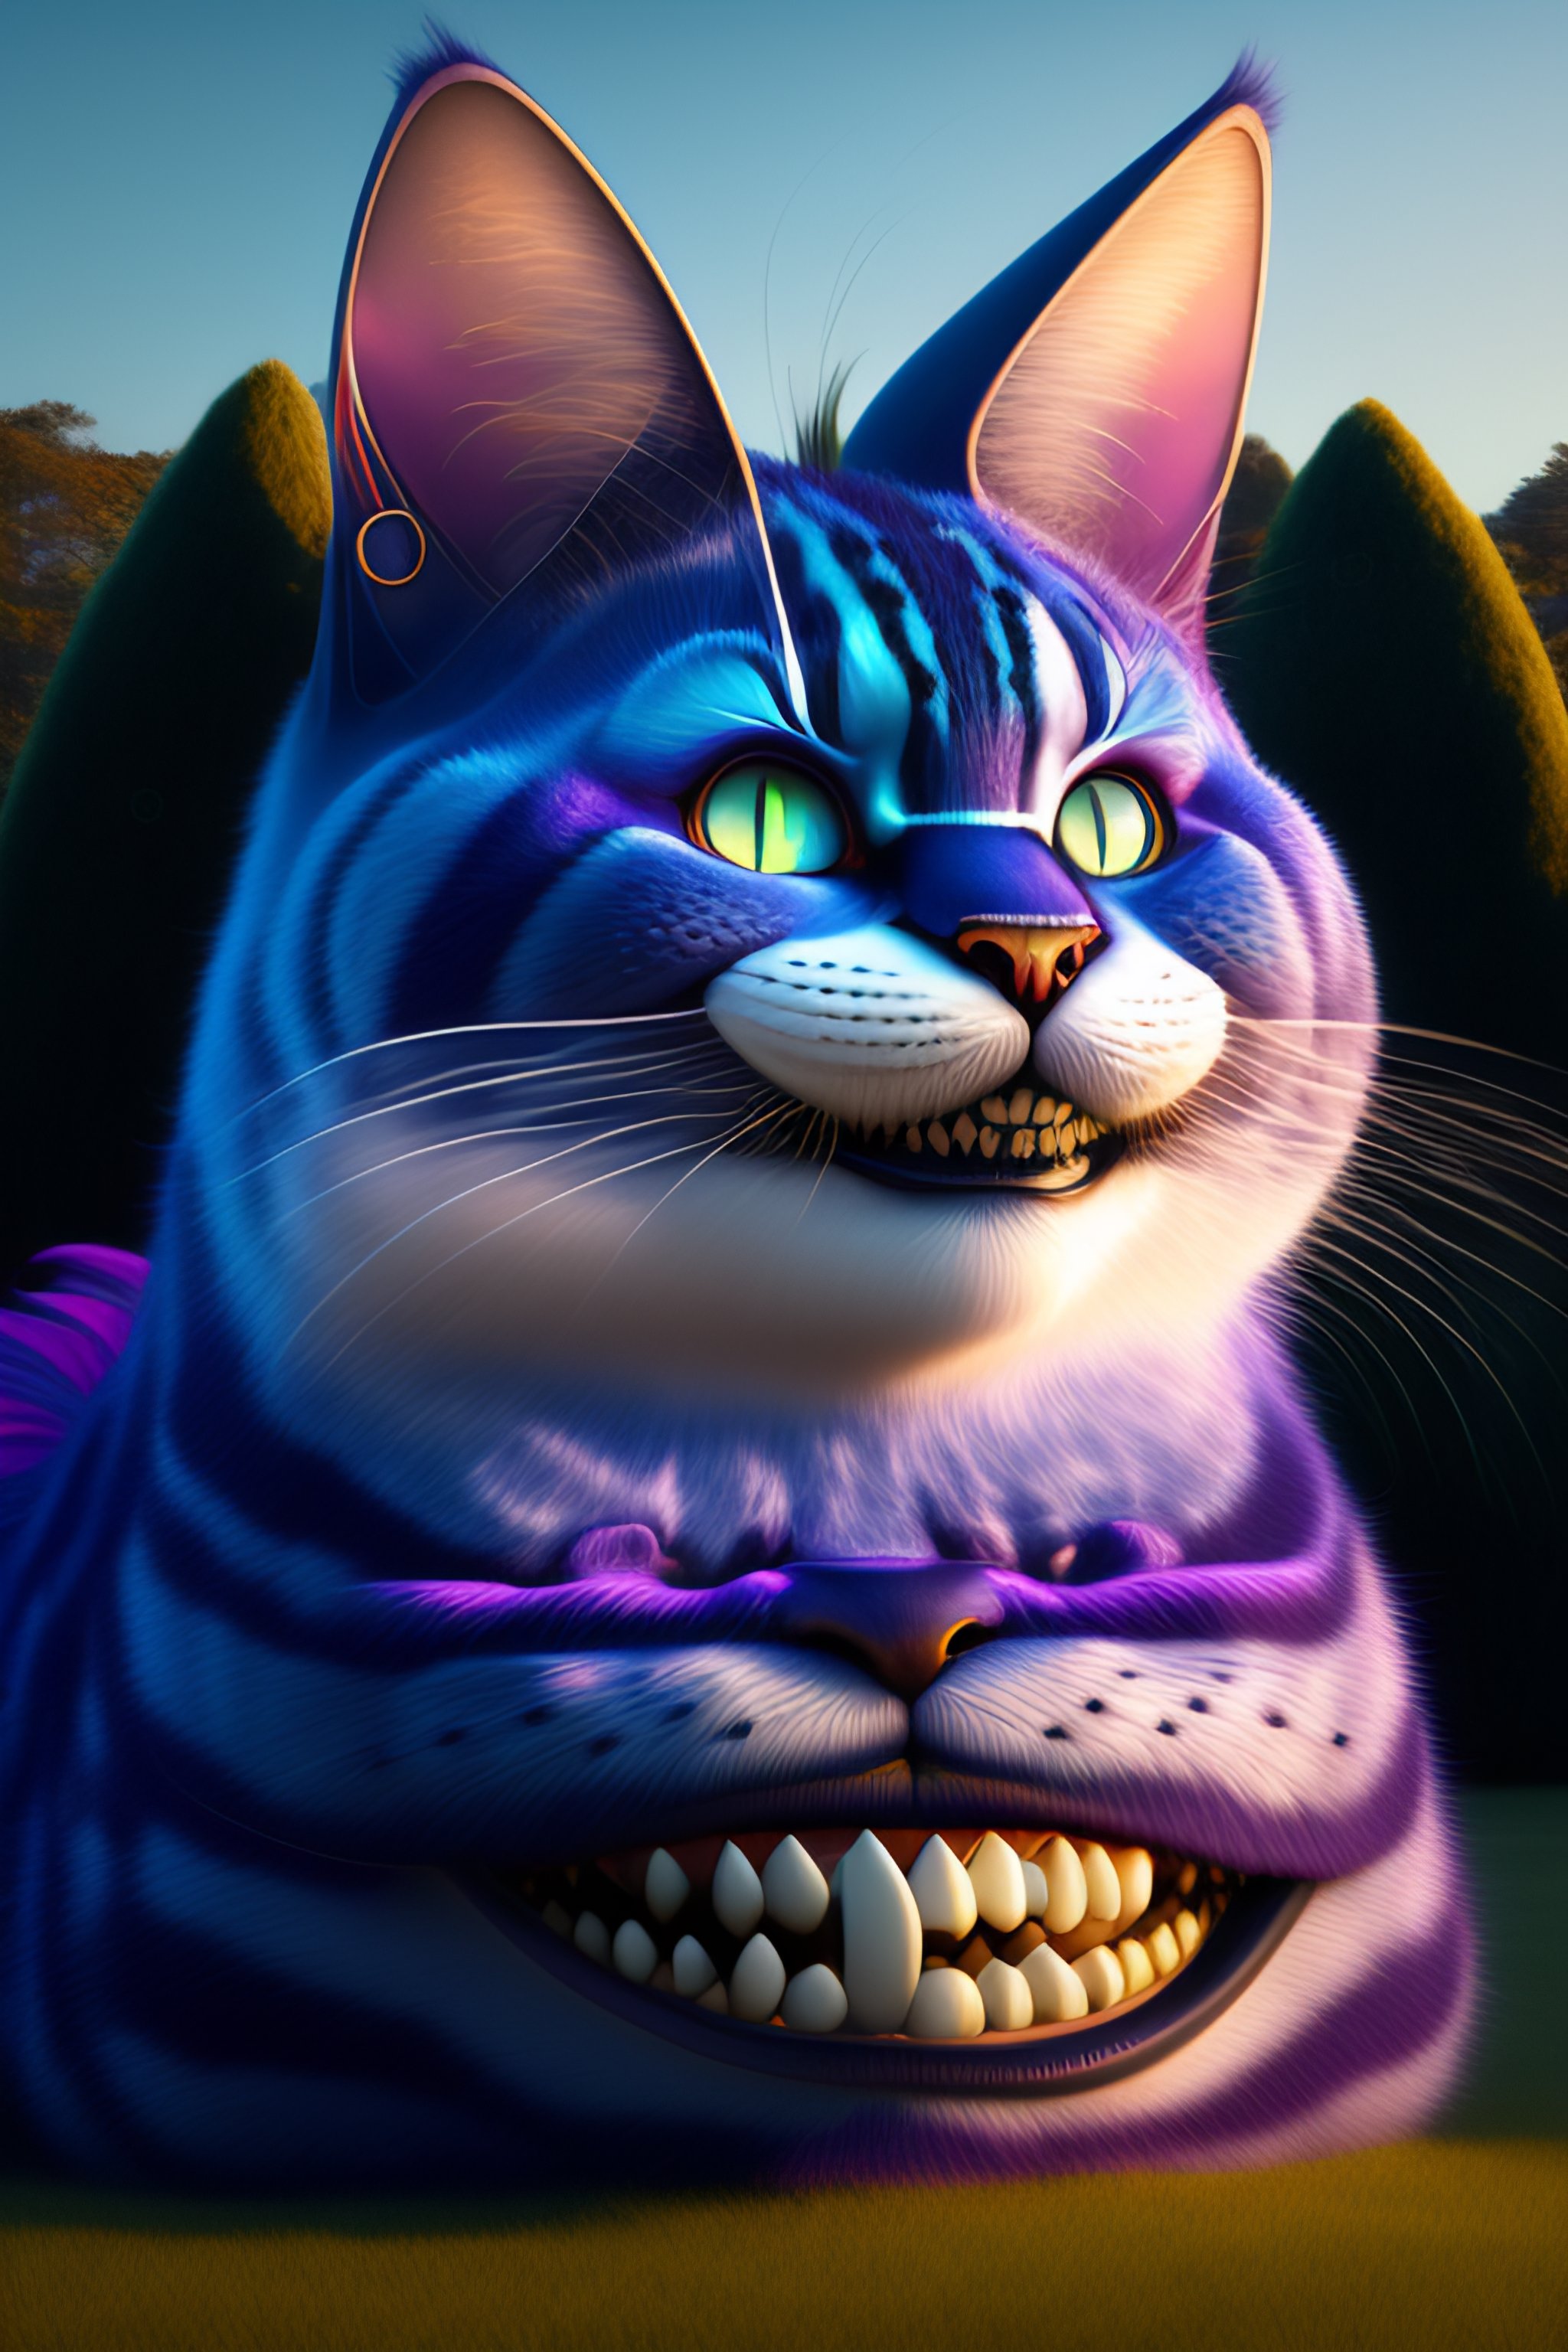 alice in wonderland, cheshire cat and makeup - image #656602 on